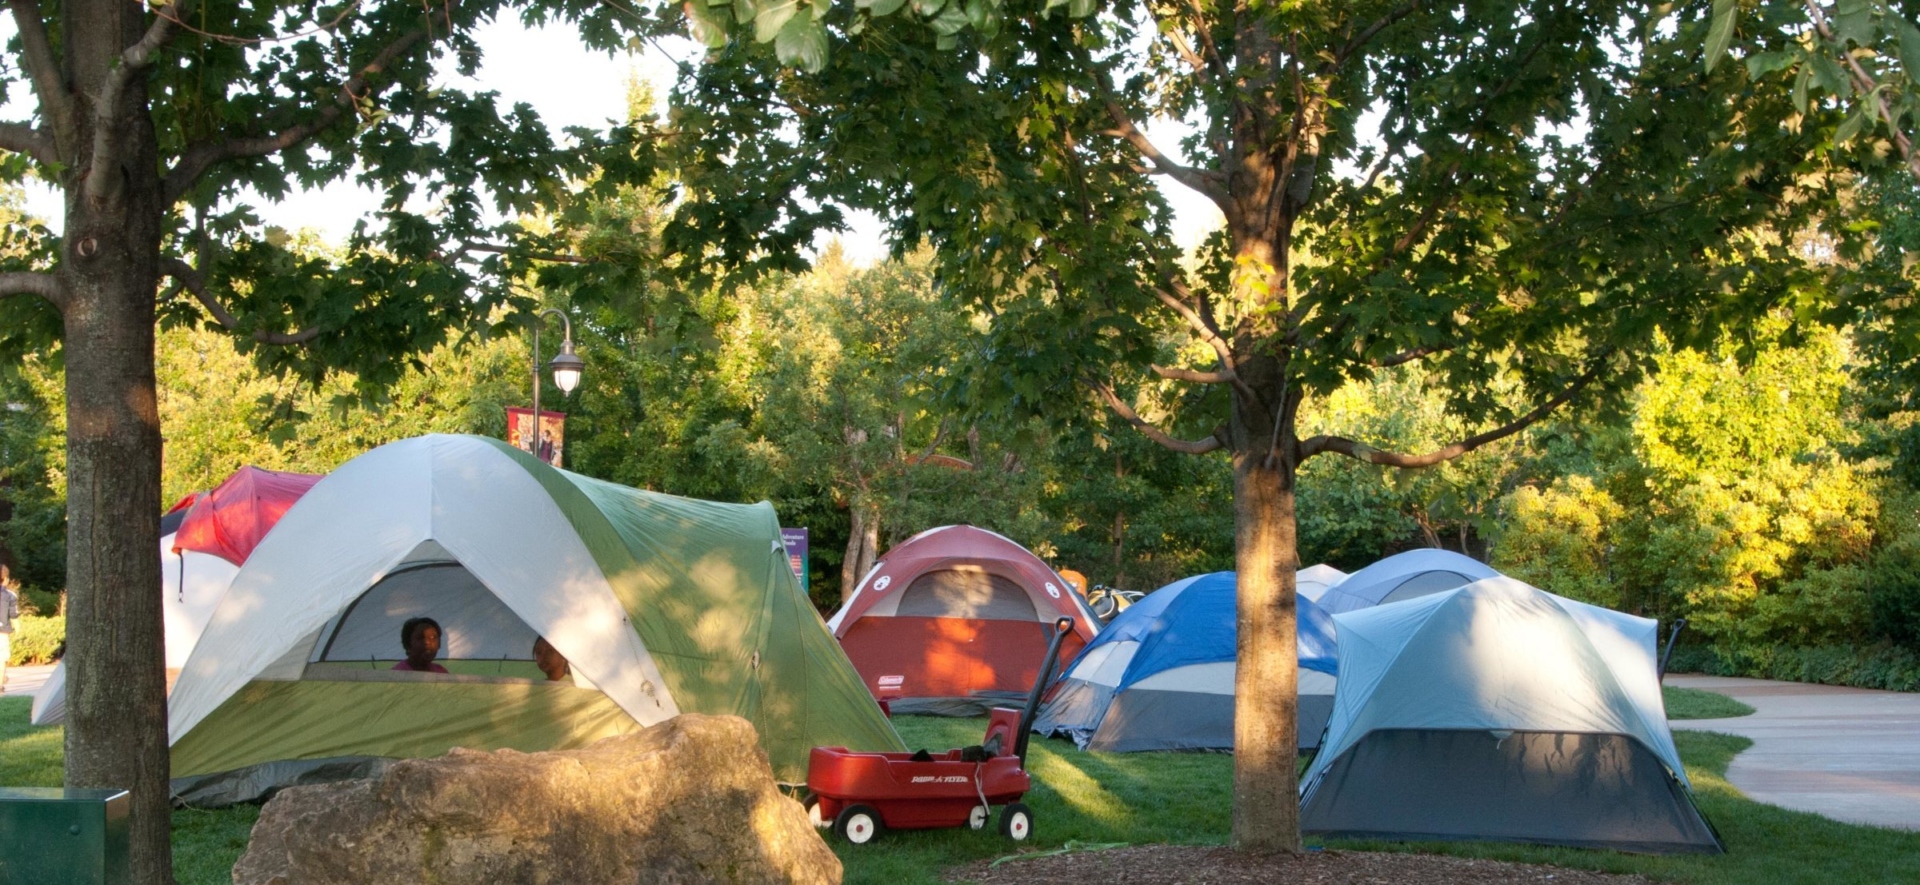 Several tents set up in the Children's Garden for a campout.